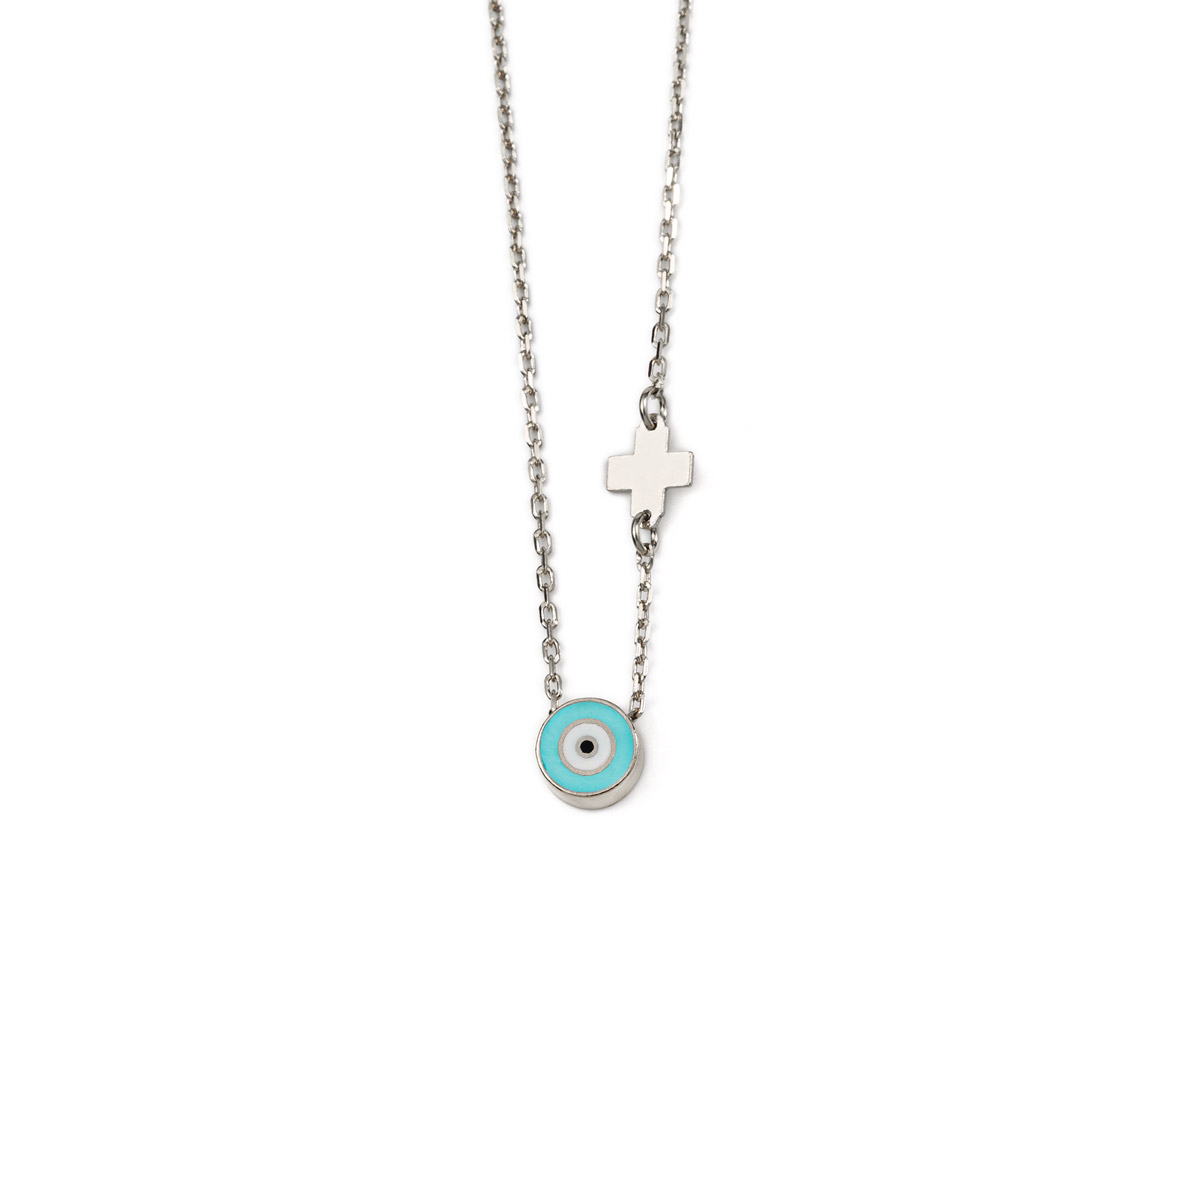 Turquoise Round Evil Eye Necklace with Cross - Sterling Silver - GREEK ROOTS